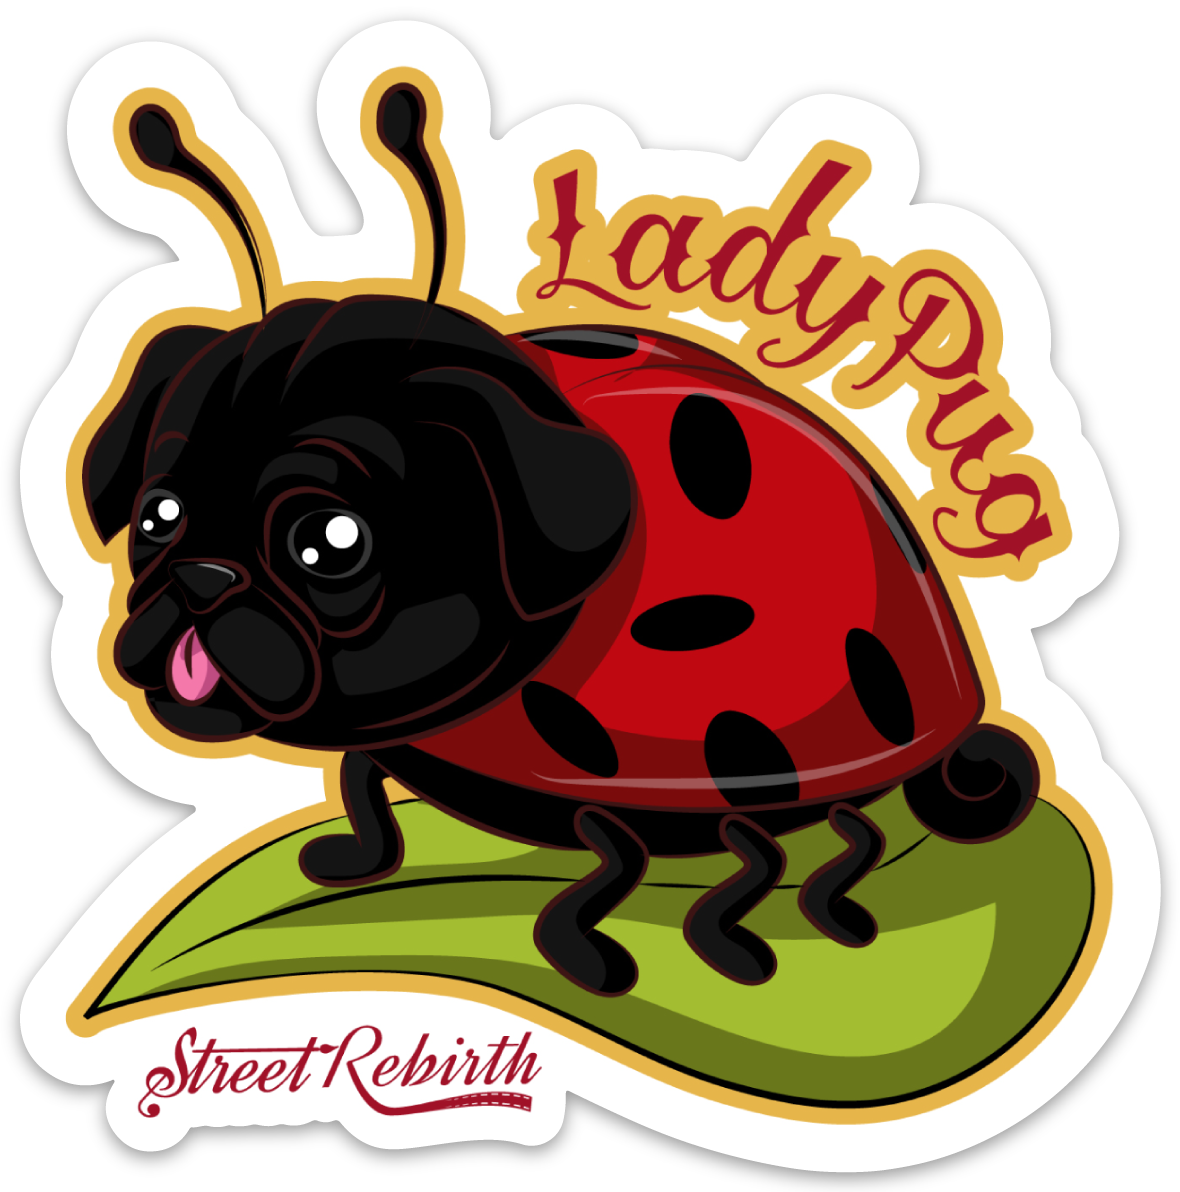 LADY PUG PUN STICKER – ONE 4 INCH WATER PROOF VINYL STICKER – FOR HYDRO FLASK, SKATEBOARD, LAPTOP, PLANNER, CAR, COLLECTING, GIFTING